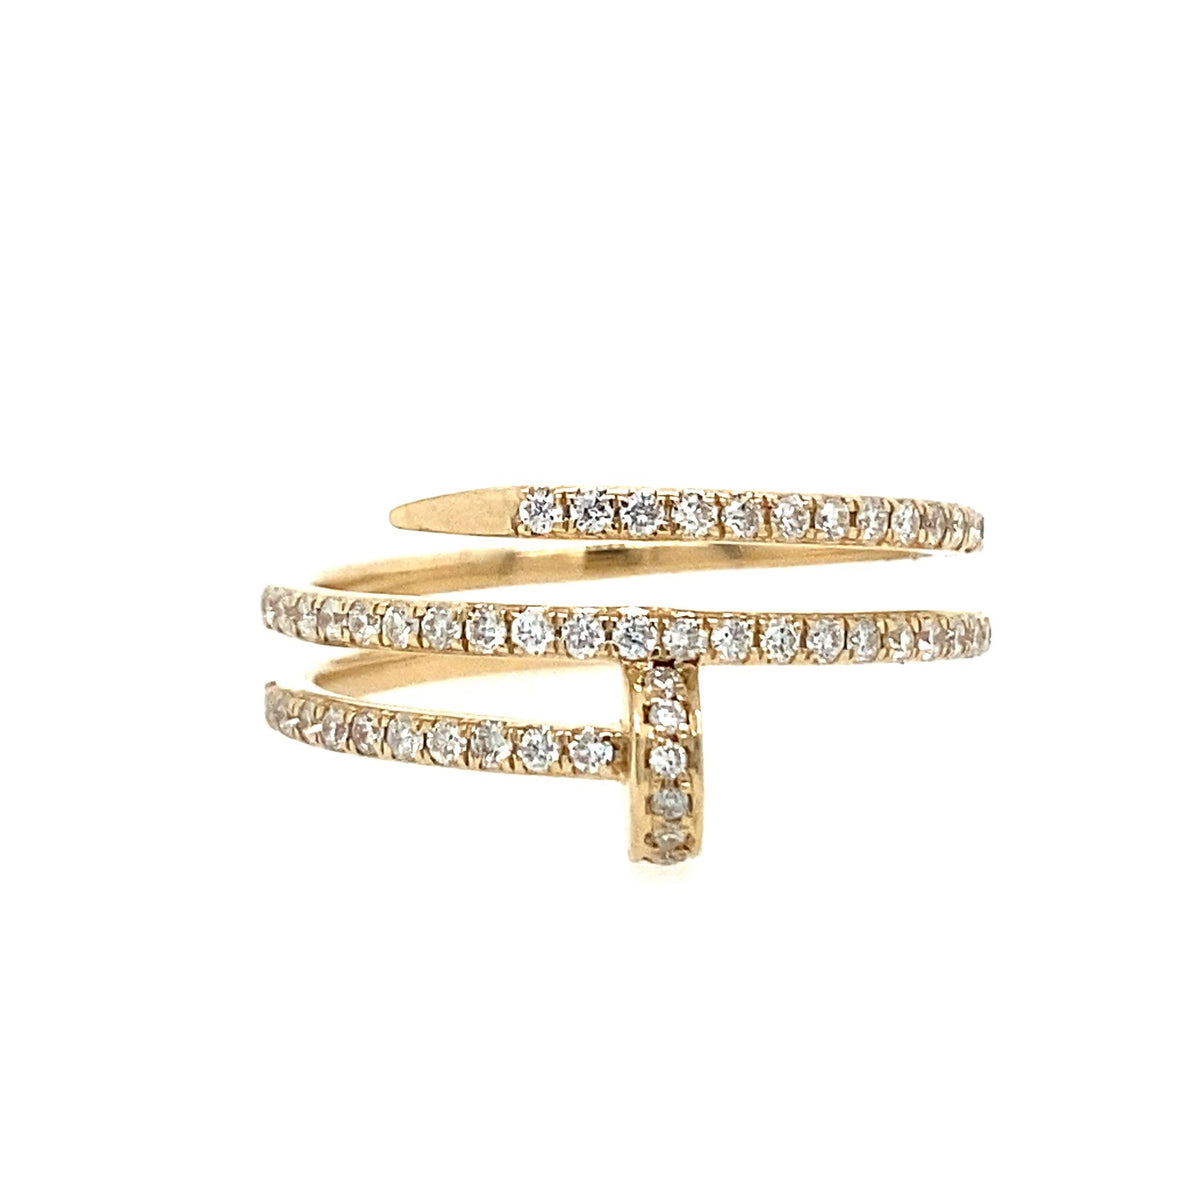 14Kt Yellow Gold Contemporary Fashion Ring With 0.40cttw Natural Diamonds